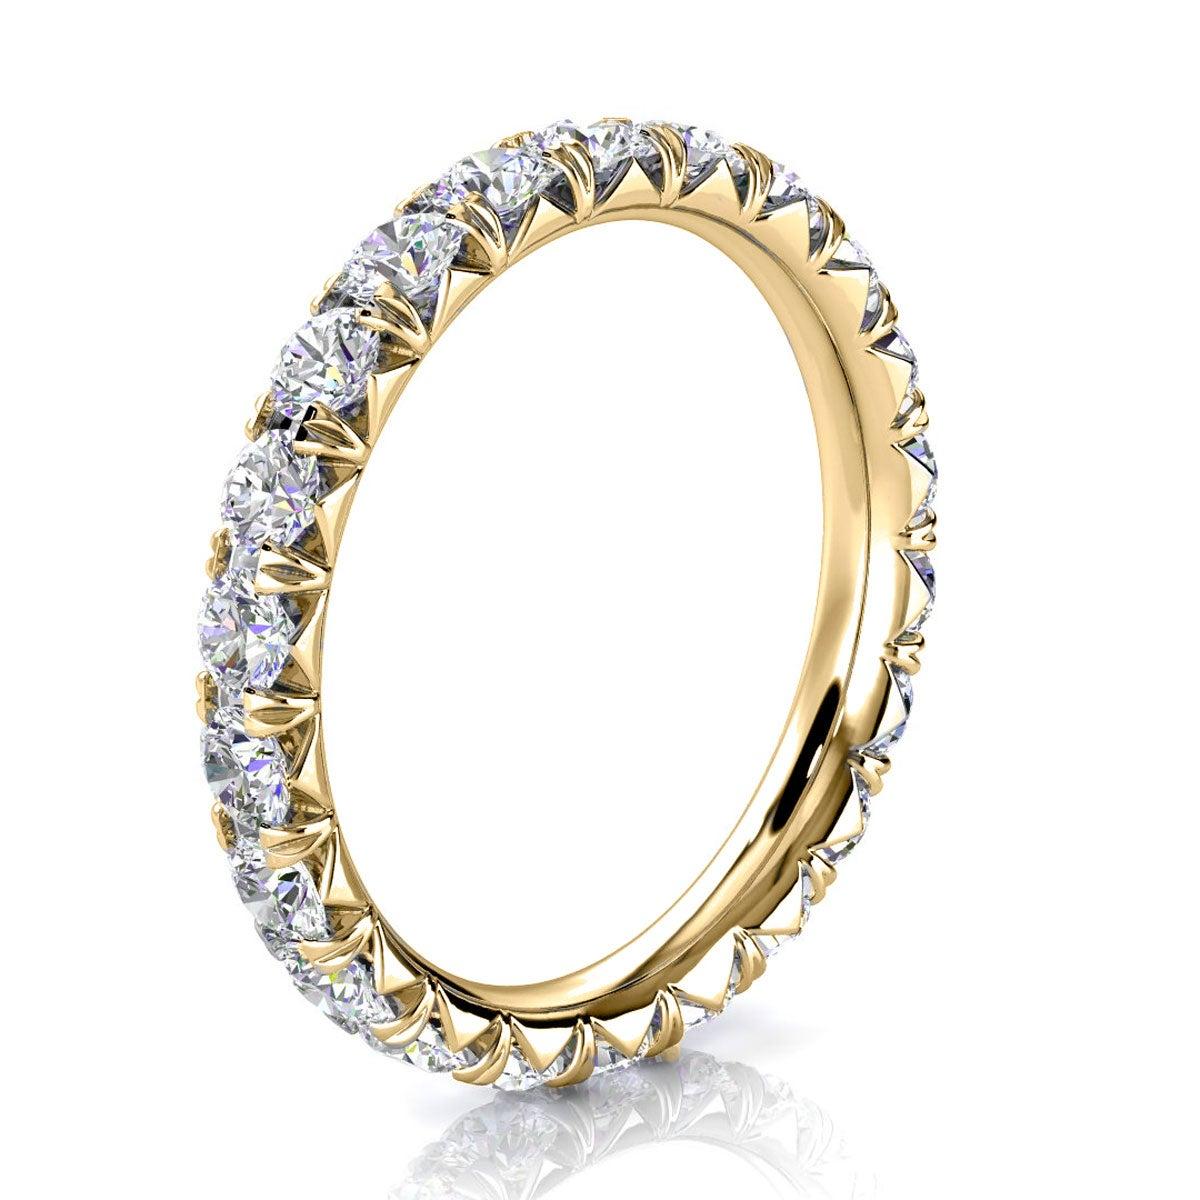 For Sale:  14k Yellow Gold Mia French Pave Diamond Eternity Ring '1 1/2 Ct. Tw' 2